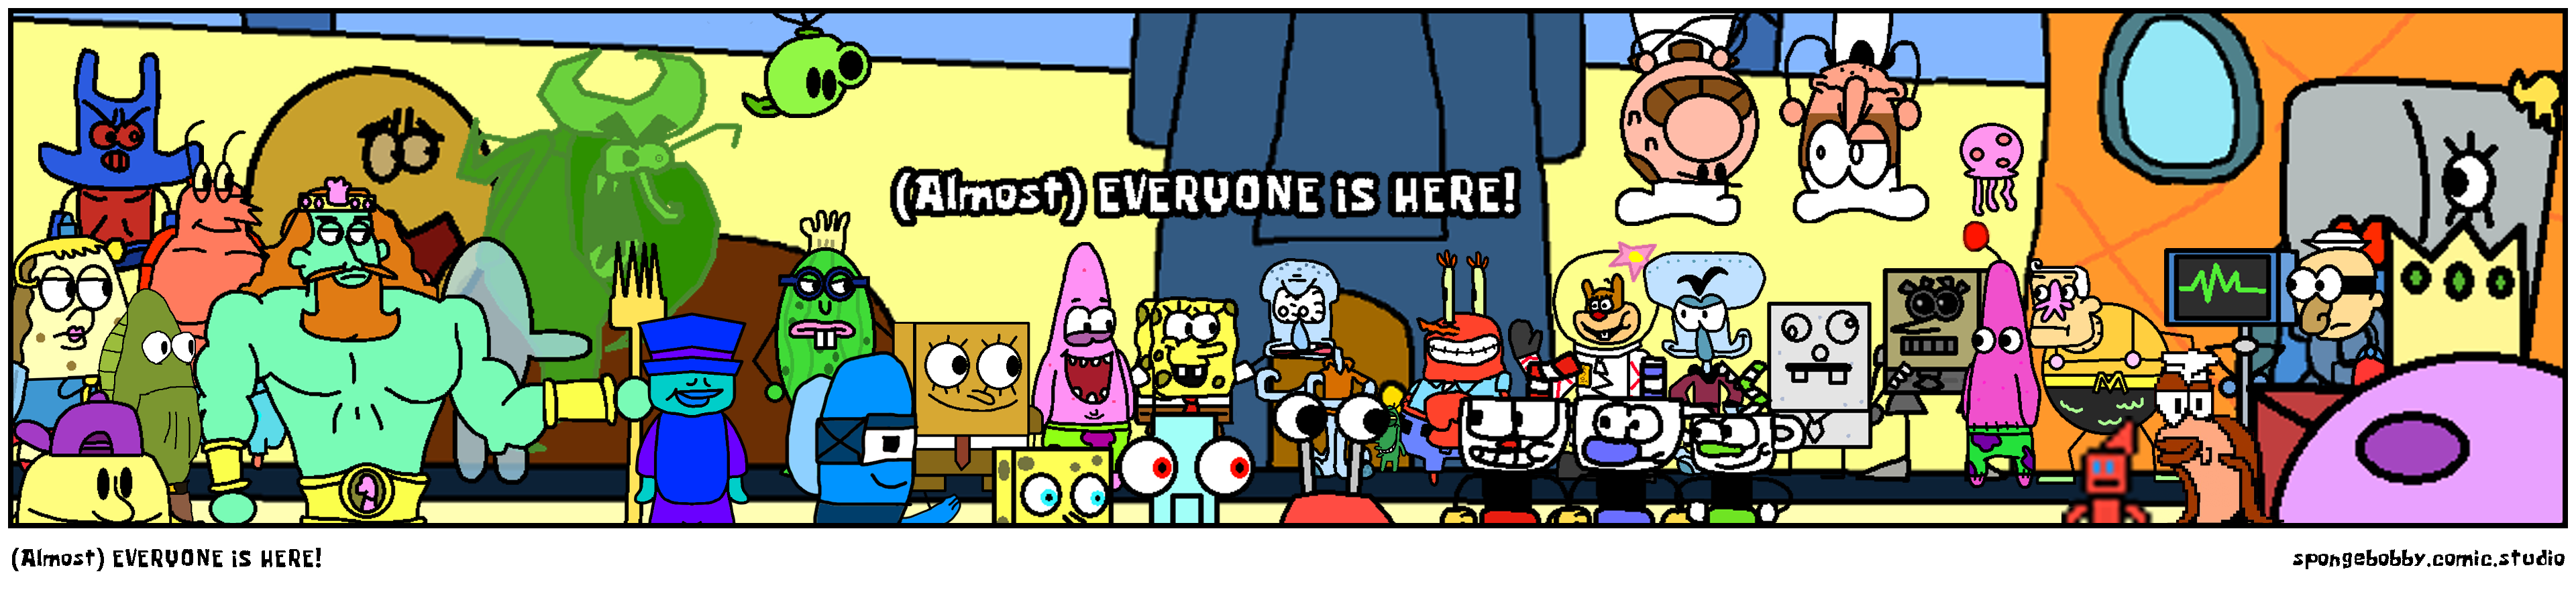 (Almost) EVERYONE IS HERE!